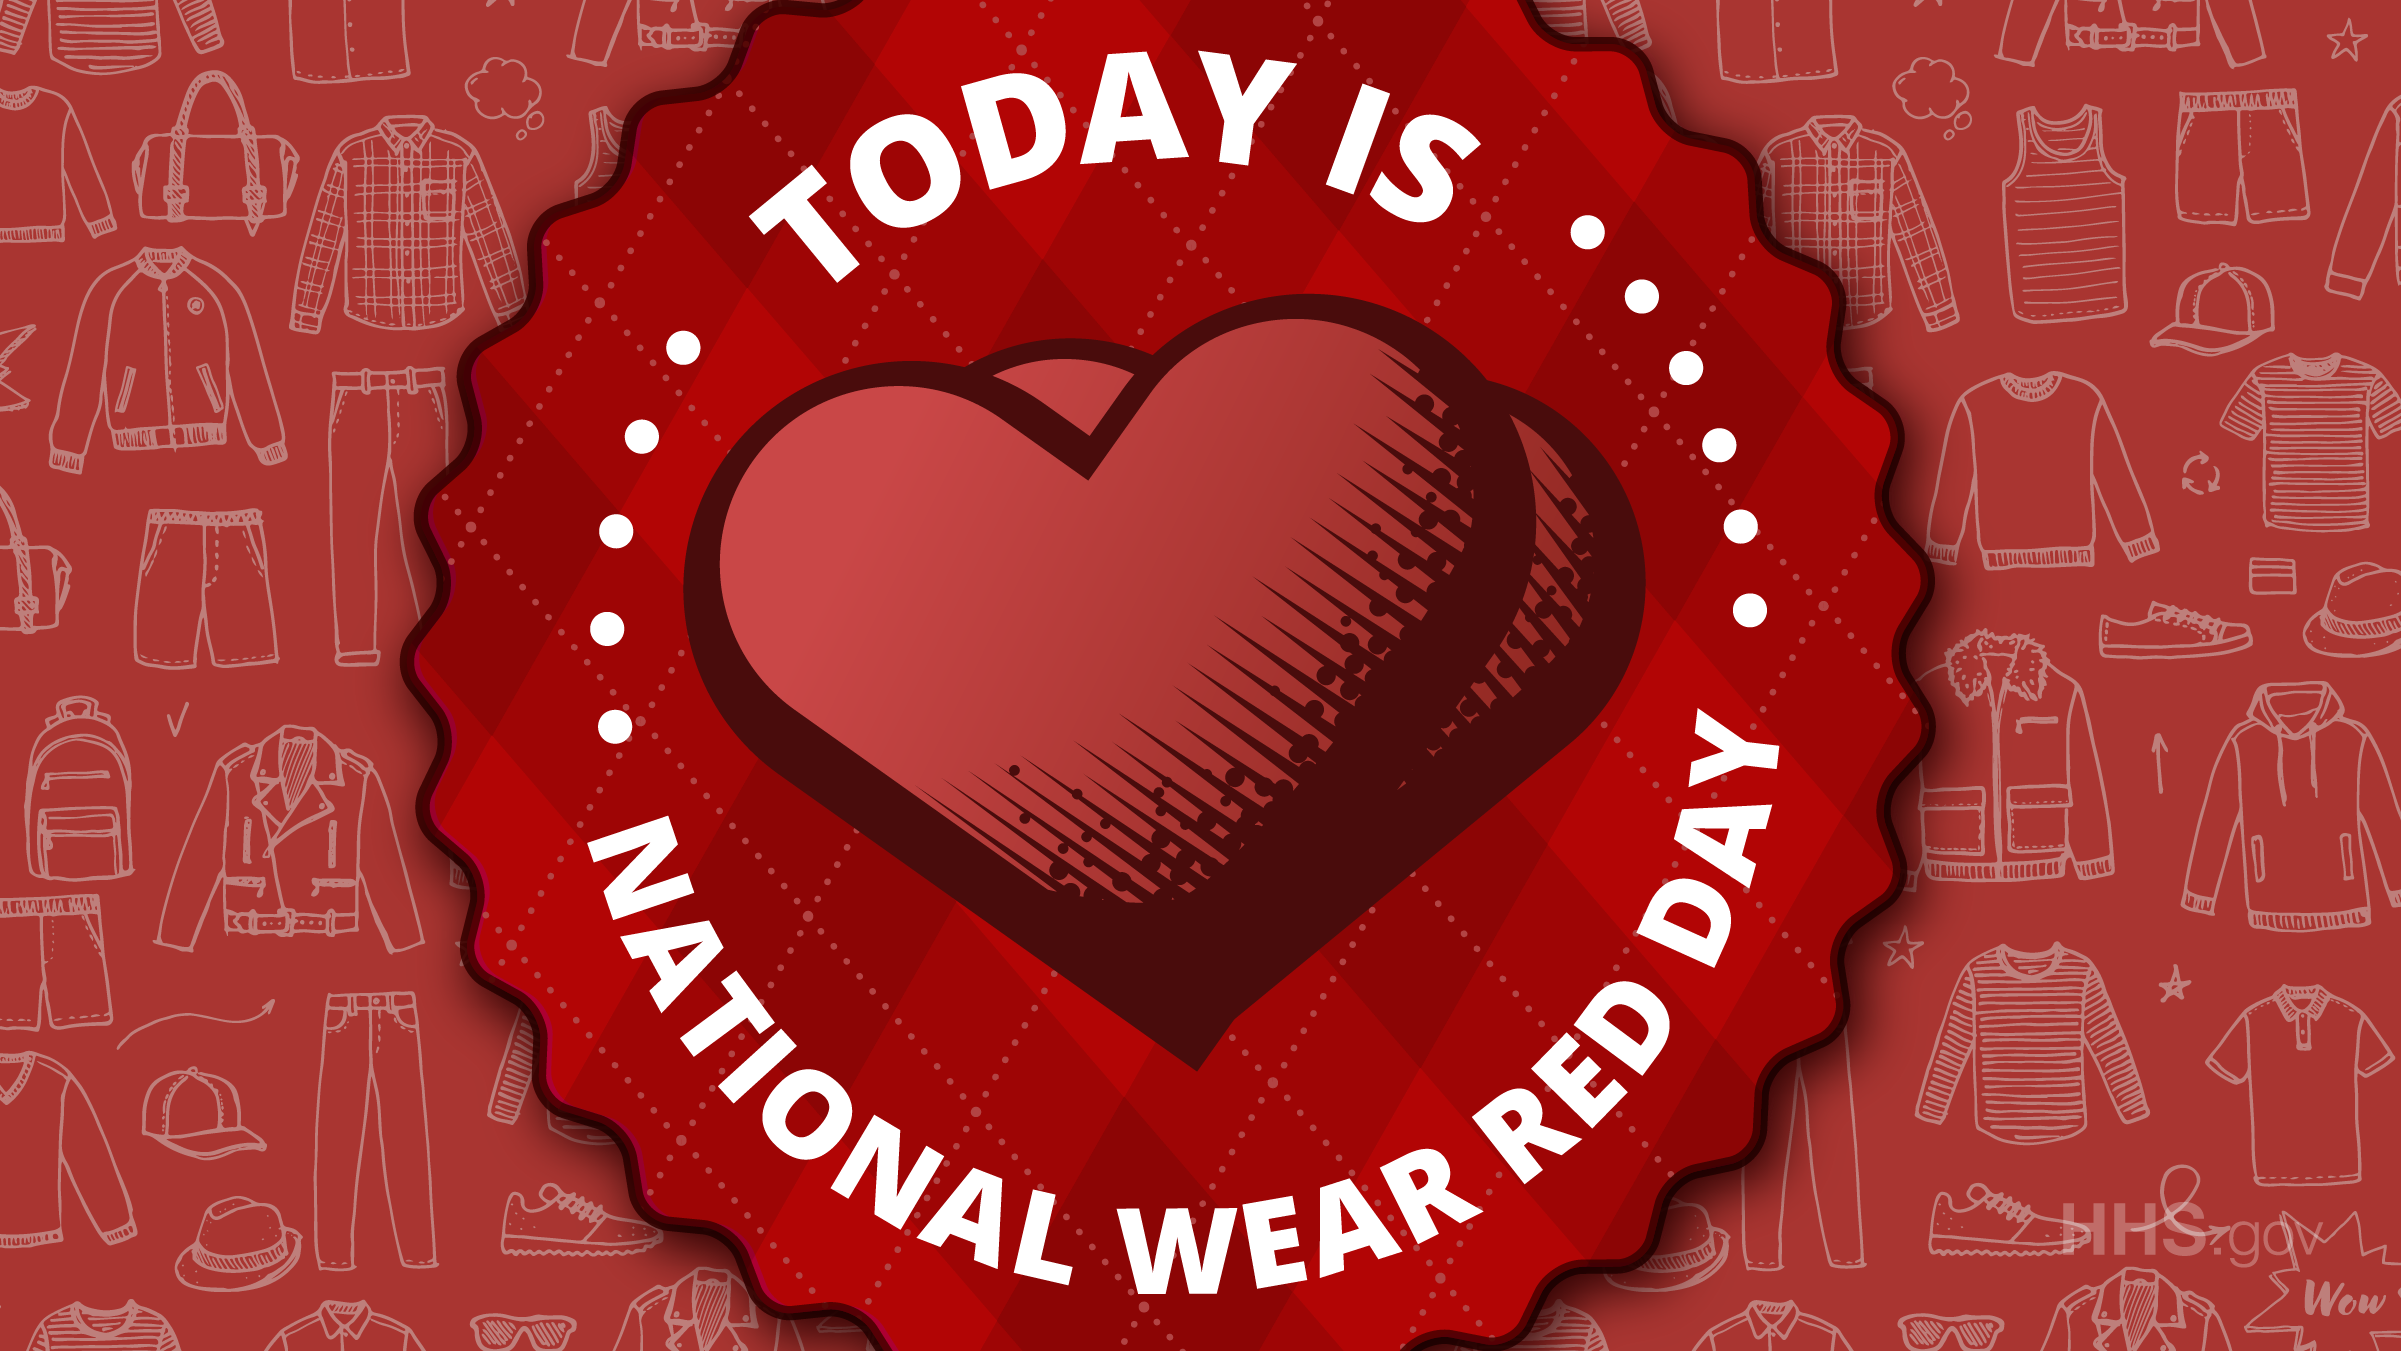 National Wear Red Day®